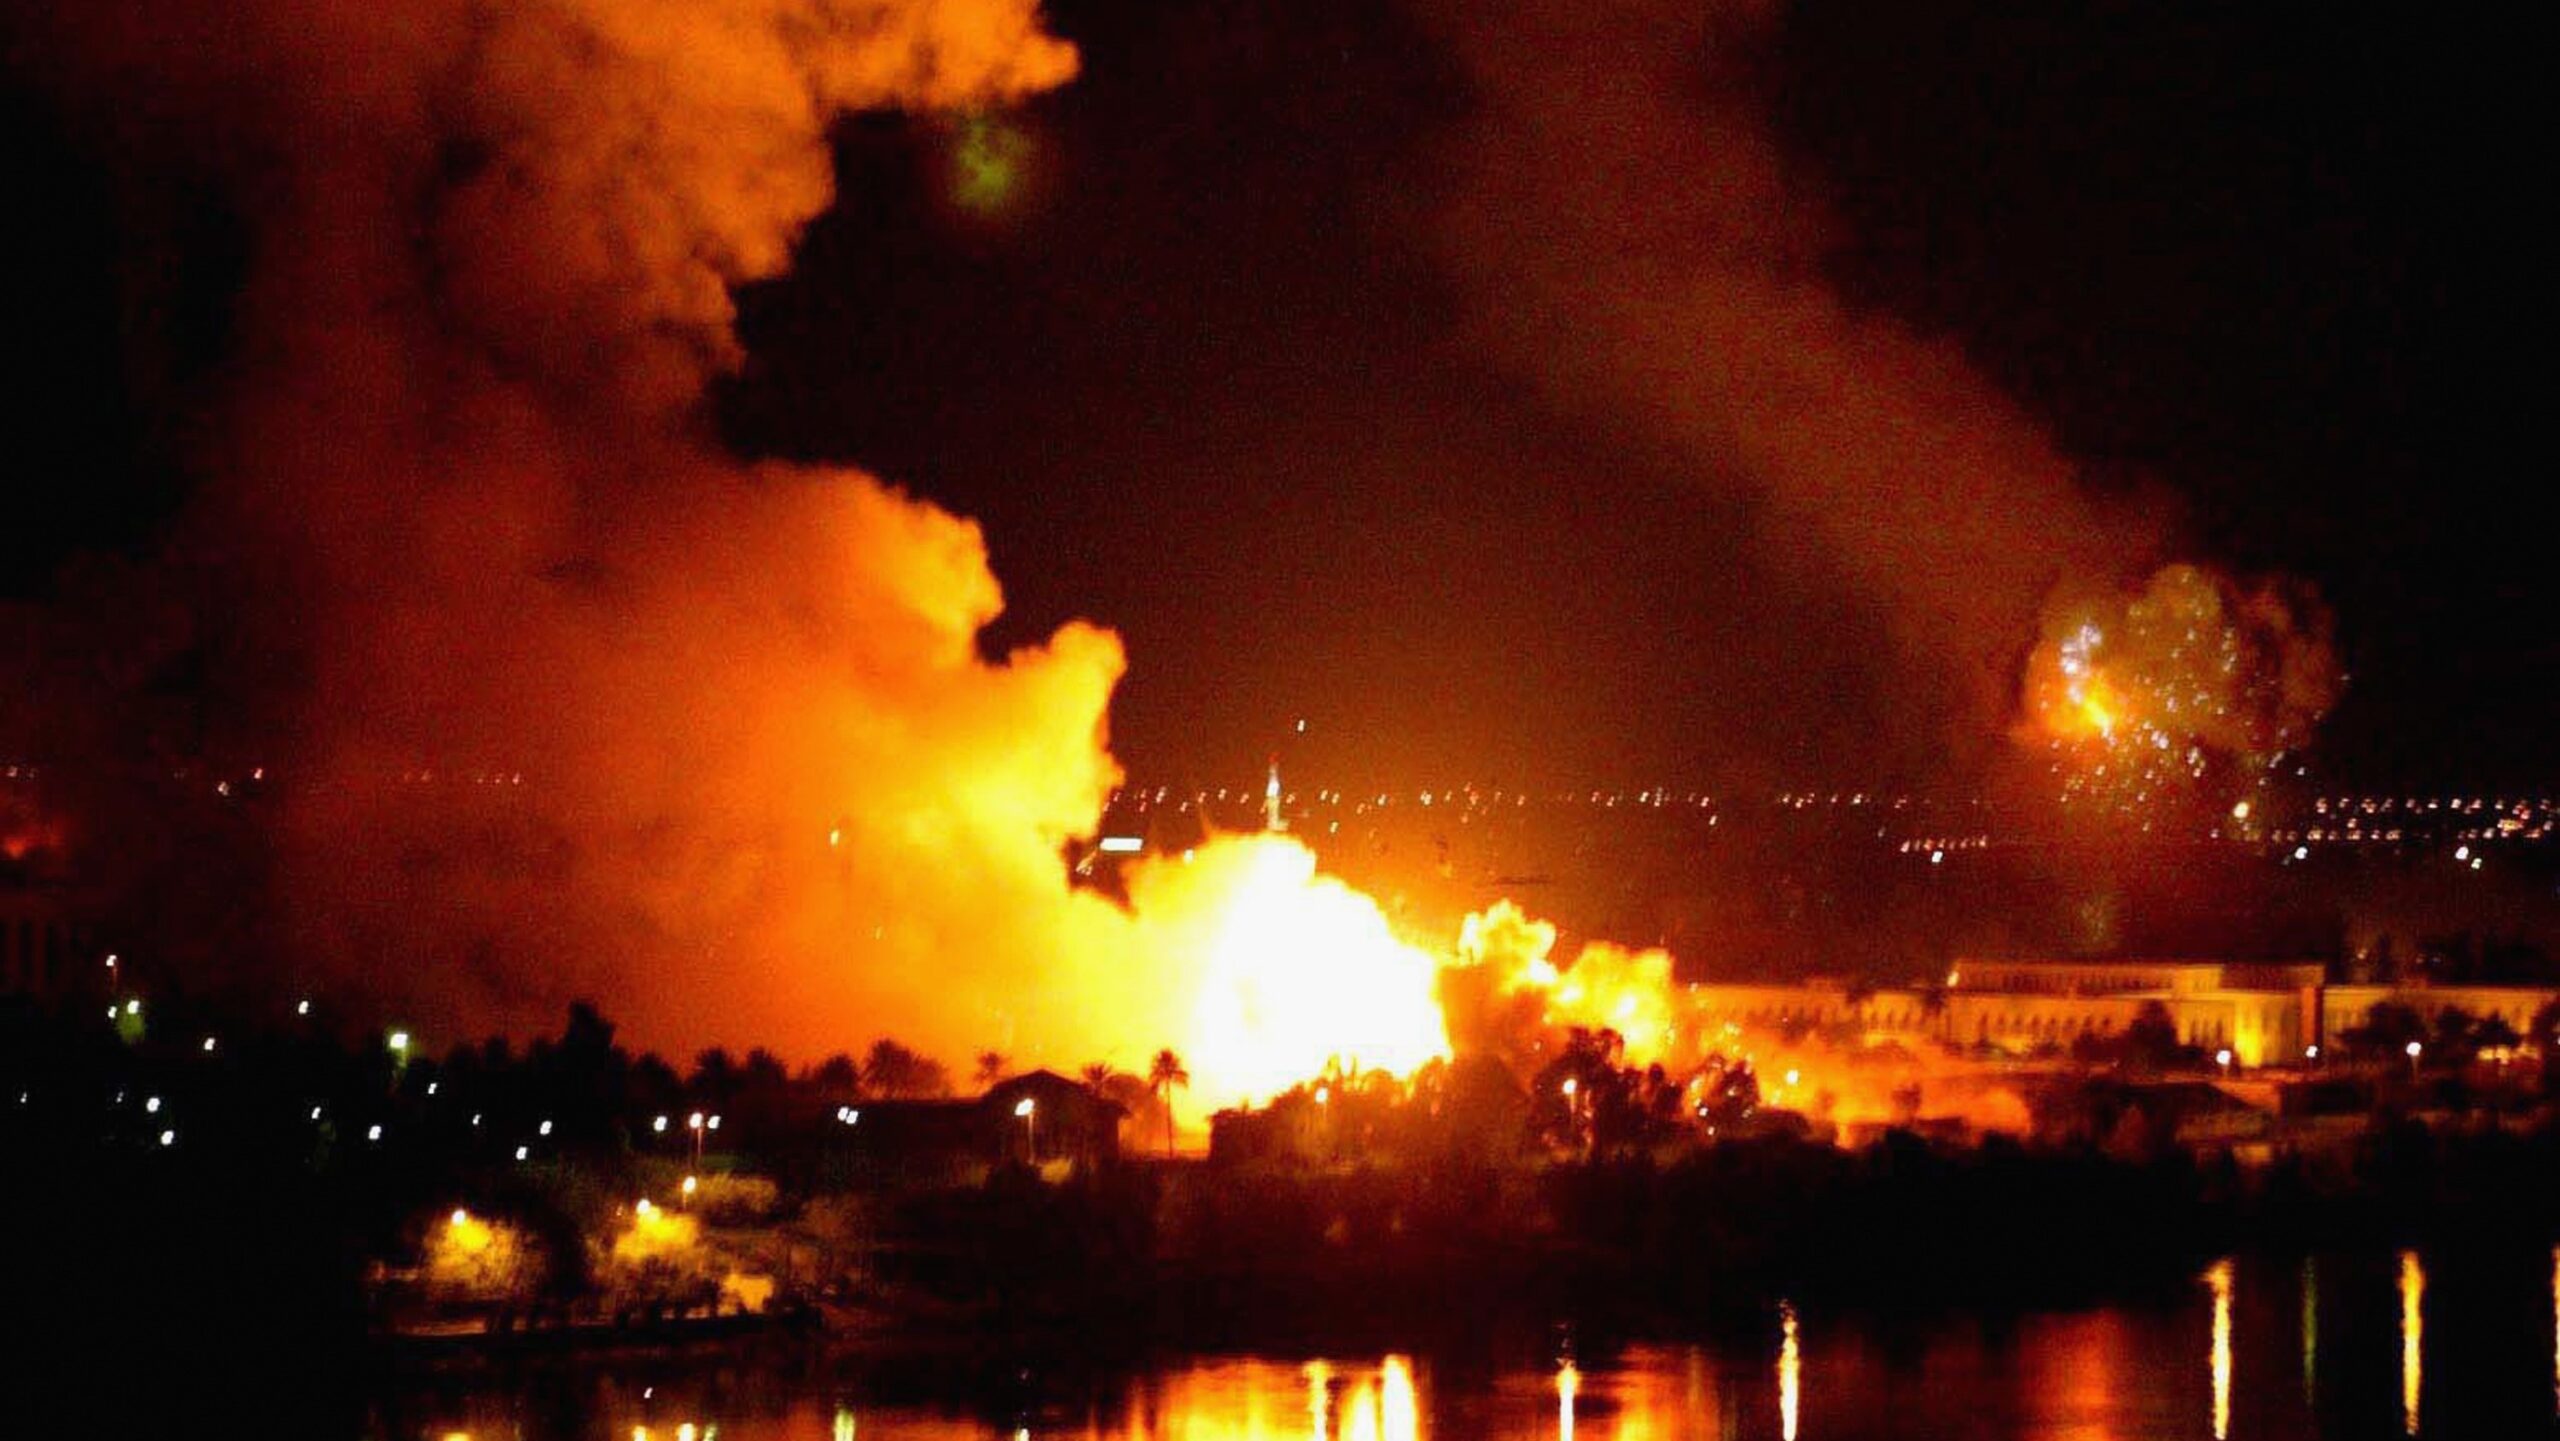 An explosion hits Baghdad on March 21, 2003 in Baghdad, Iraq as hostilities between U.S. led Coalition forces and the Iraqi Regime continue. (Photo by Mirrorpix/Getty Images) 